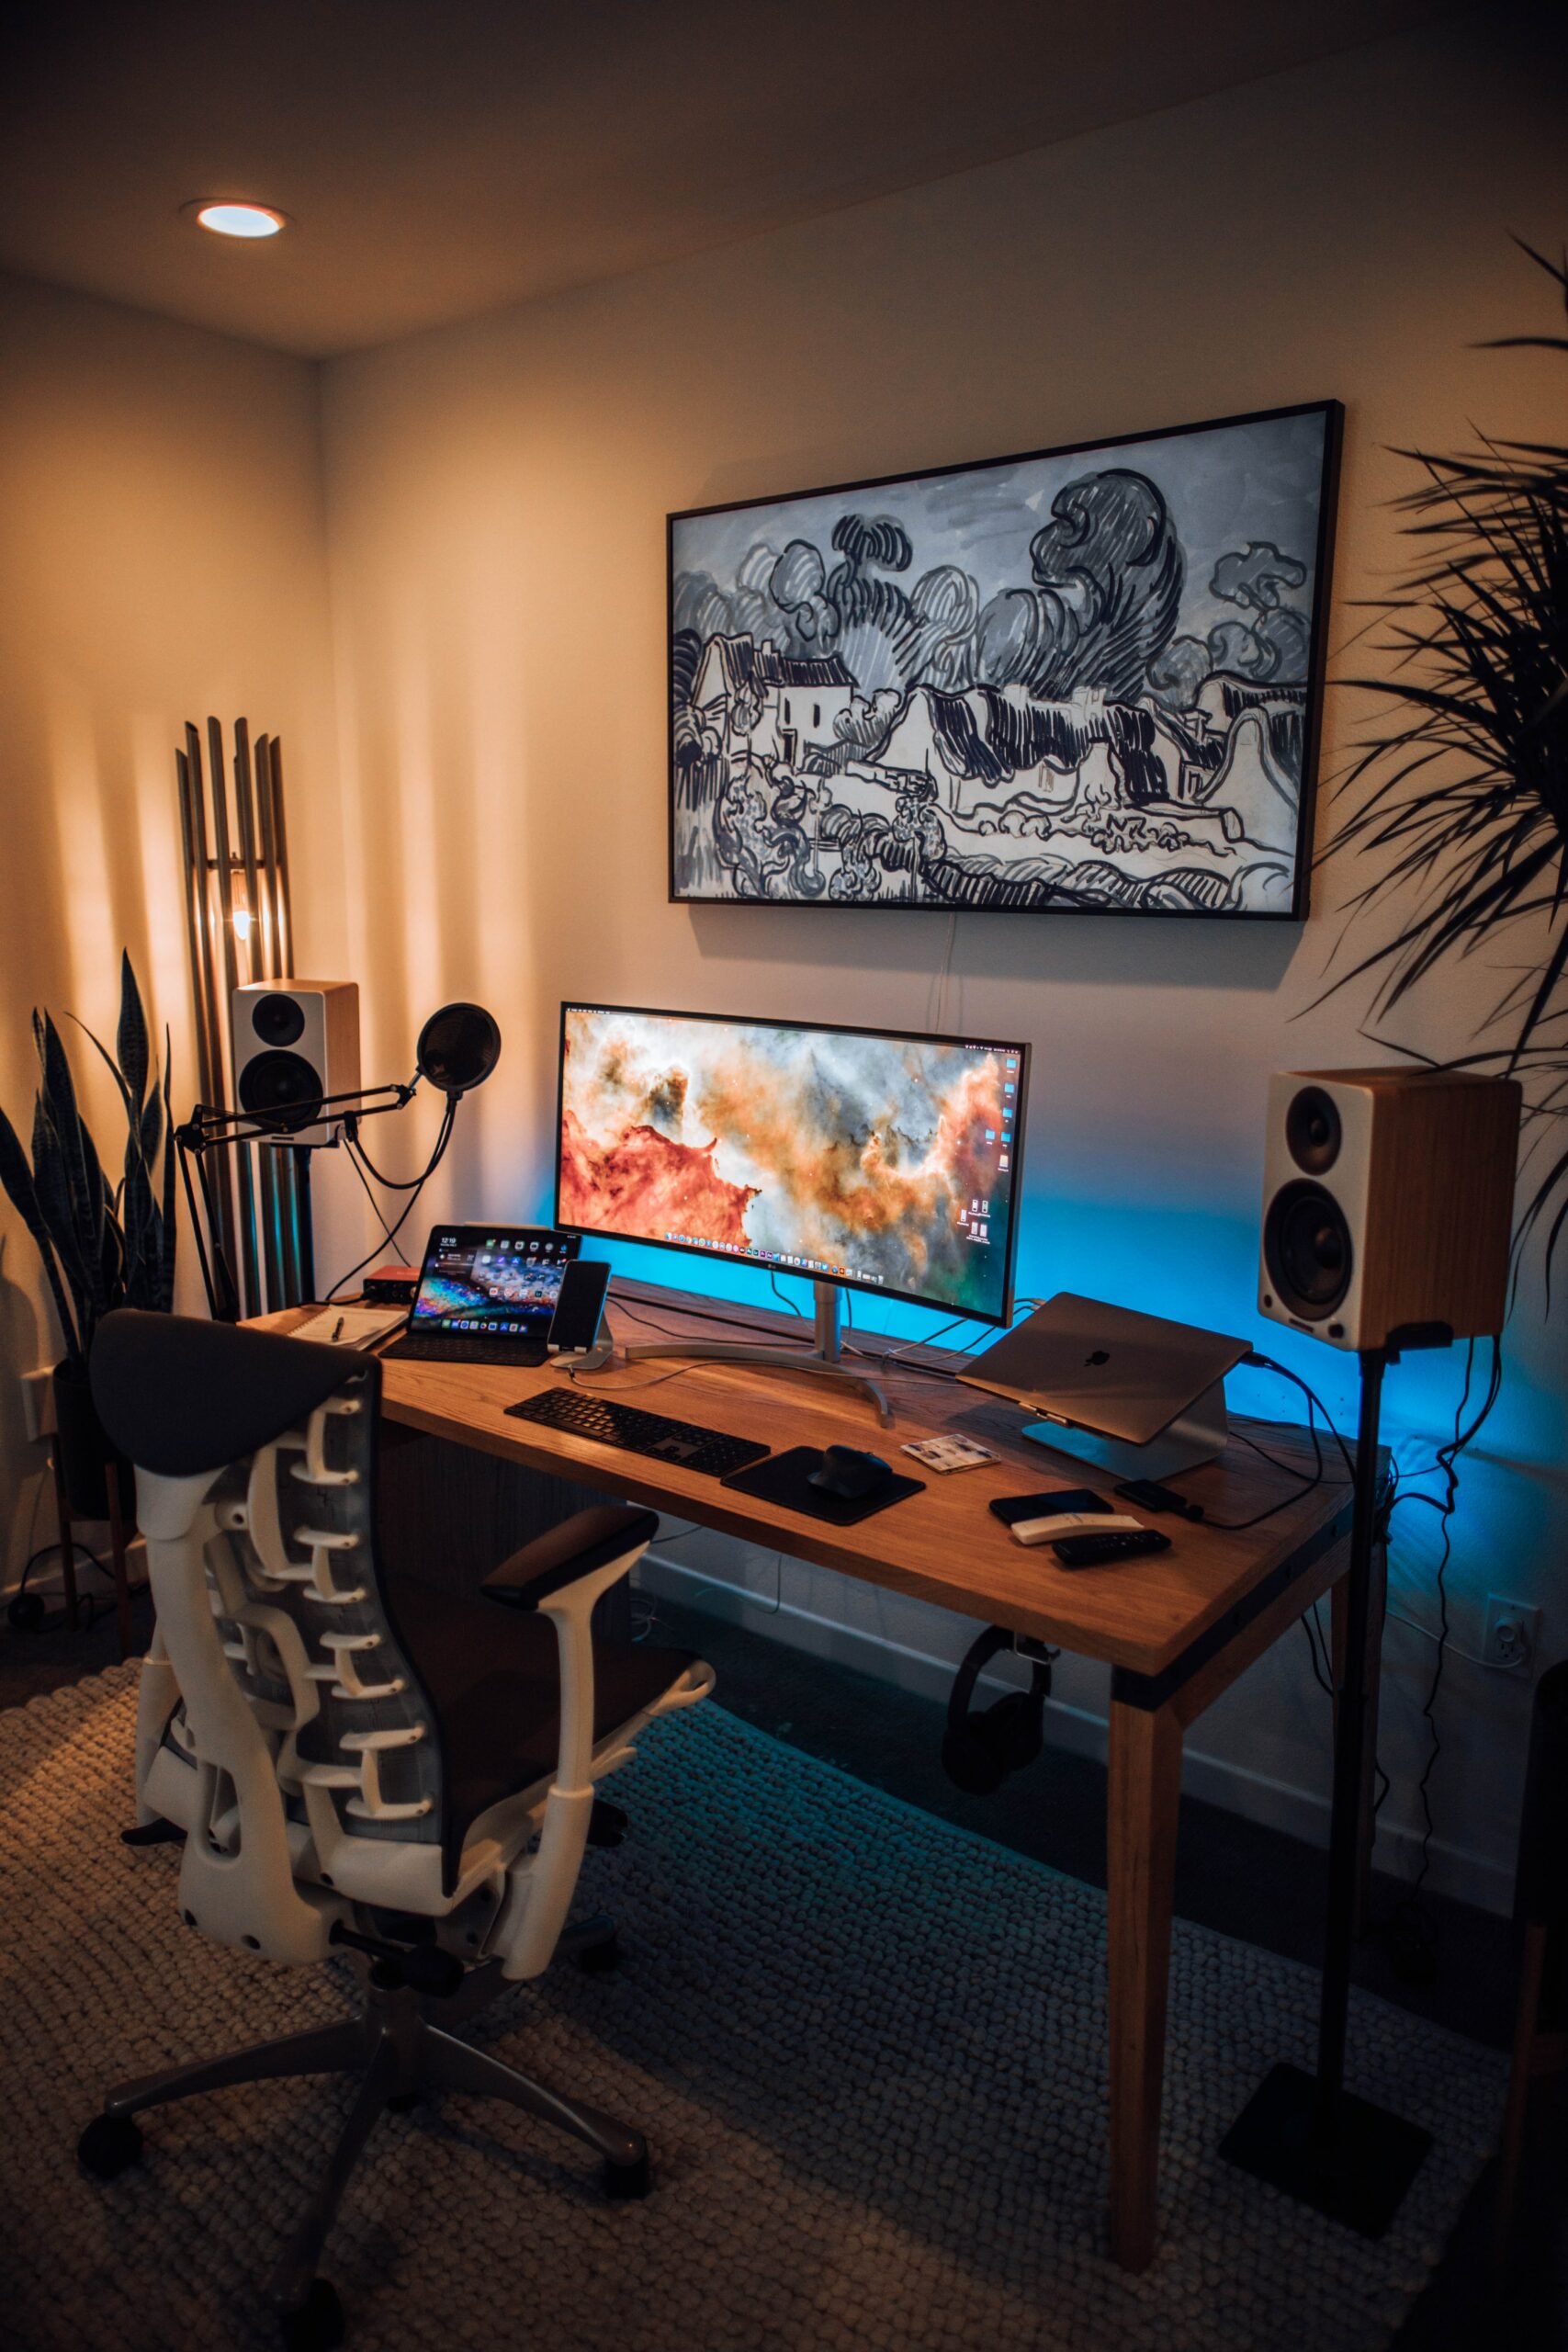 The Game Station - Home